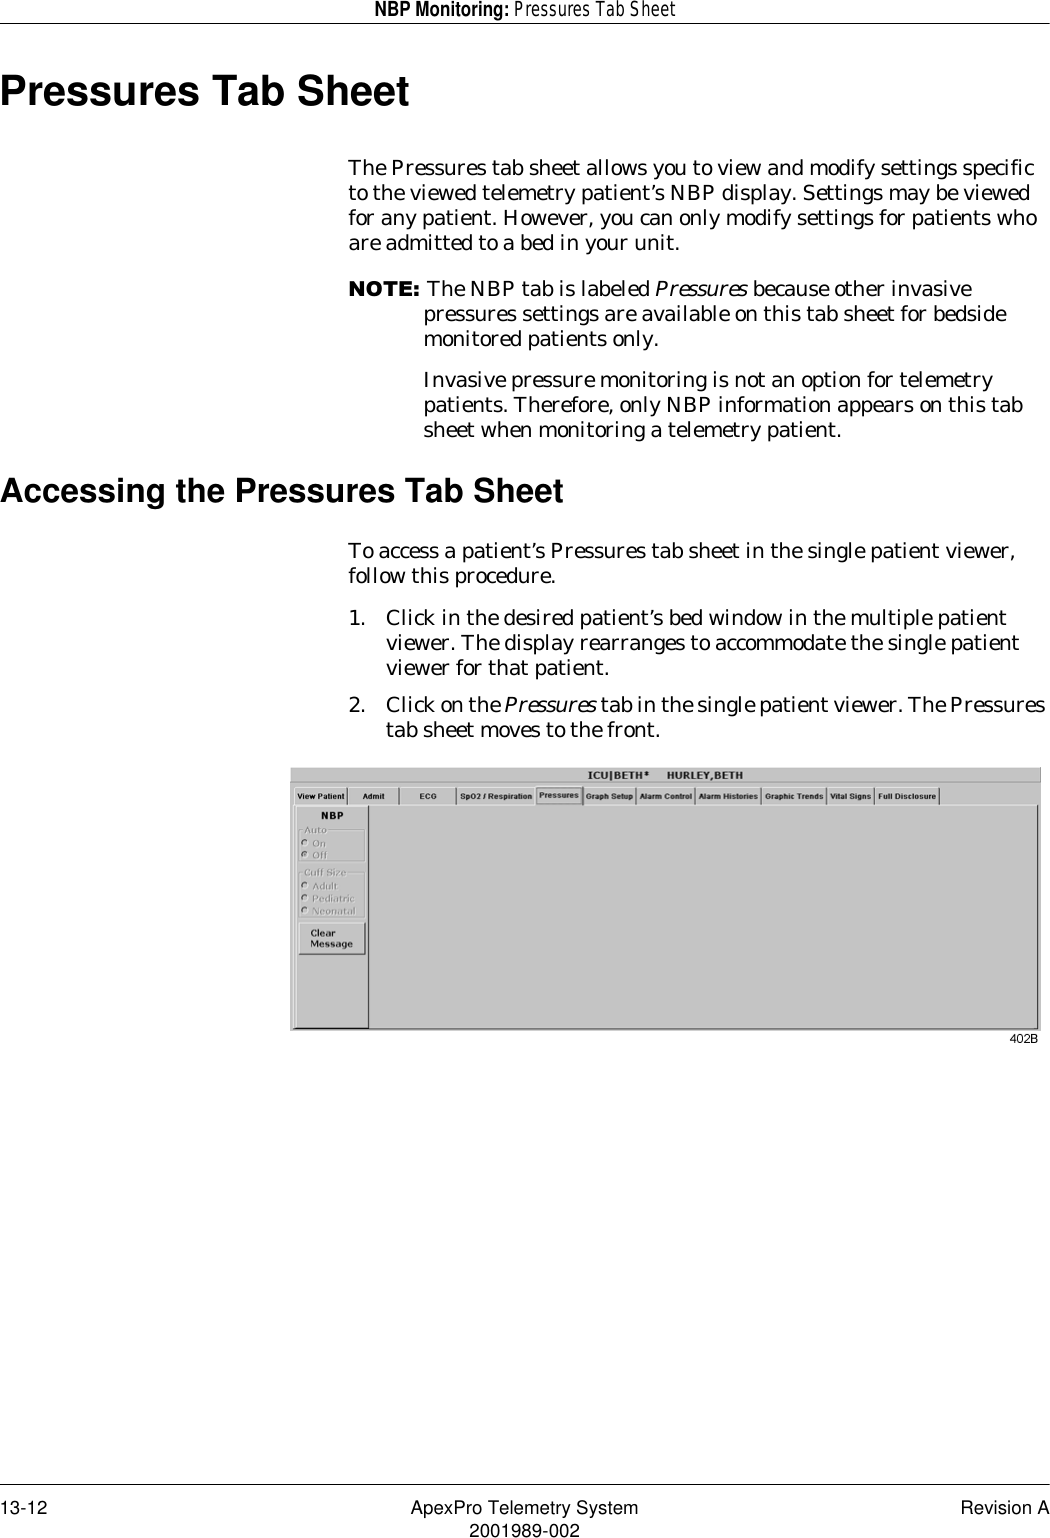 13-12 ApexPro Telemetry System Revision A2001989-002NBP Monitoring: Pressures Tab SheetPressures Tab SheetThe Pressures tab sheet allows you to view and modify settings specific to the viewed telemetry patient’s NBP display. Settings may be viewed for any patient. However, you can only modify settings for patients who are admitted to a bed in your unit.127(The NBP tab is labeled Pressures because other invasive pressures settings are available on this tab sheet for bedside monitored patients only.Invasive pressure monitoring is not an option for telemetry patients. Therefore, only NBP information appears on this tab sheet when monitoring a telemetry patient.Accessing the Pressures Tab SheetTo access a patient’s Pressures tab sheet in the single patient viewer, follow this procedure.1. Click in the desired patient’s bed window in the multiple patient viewer. The display rearranges to accommodate the single patient viewer for that patient.2. Click on the Pressures tab in the single patient viewer. The Pressures tab sheet moves to the front.